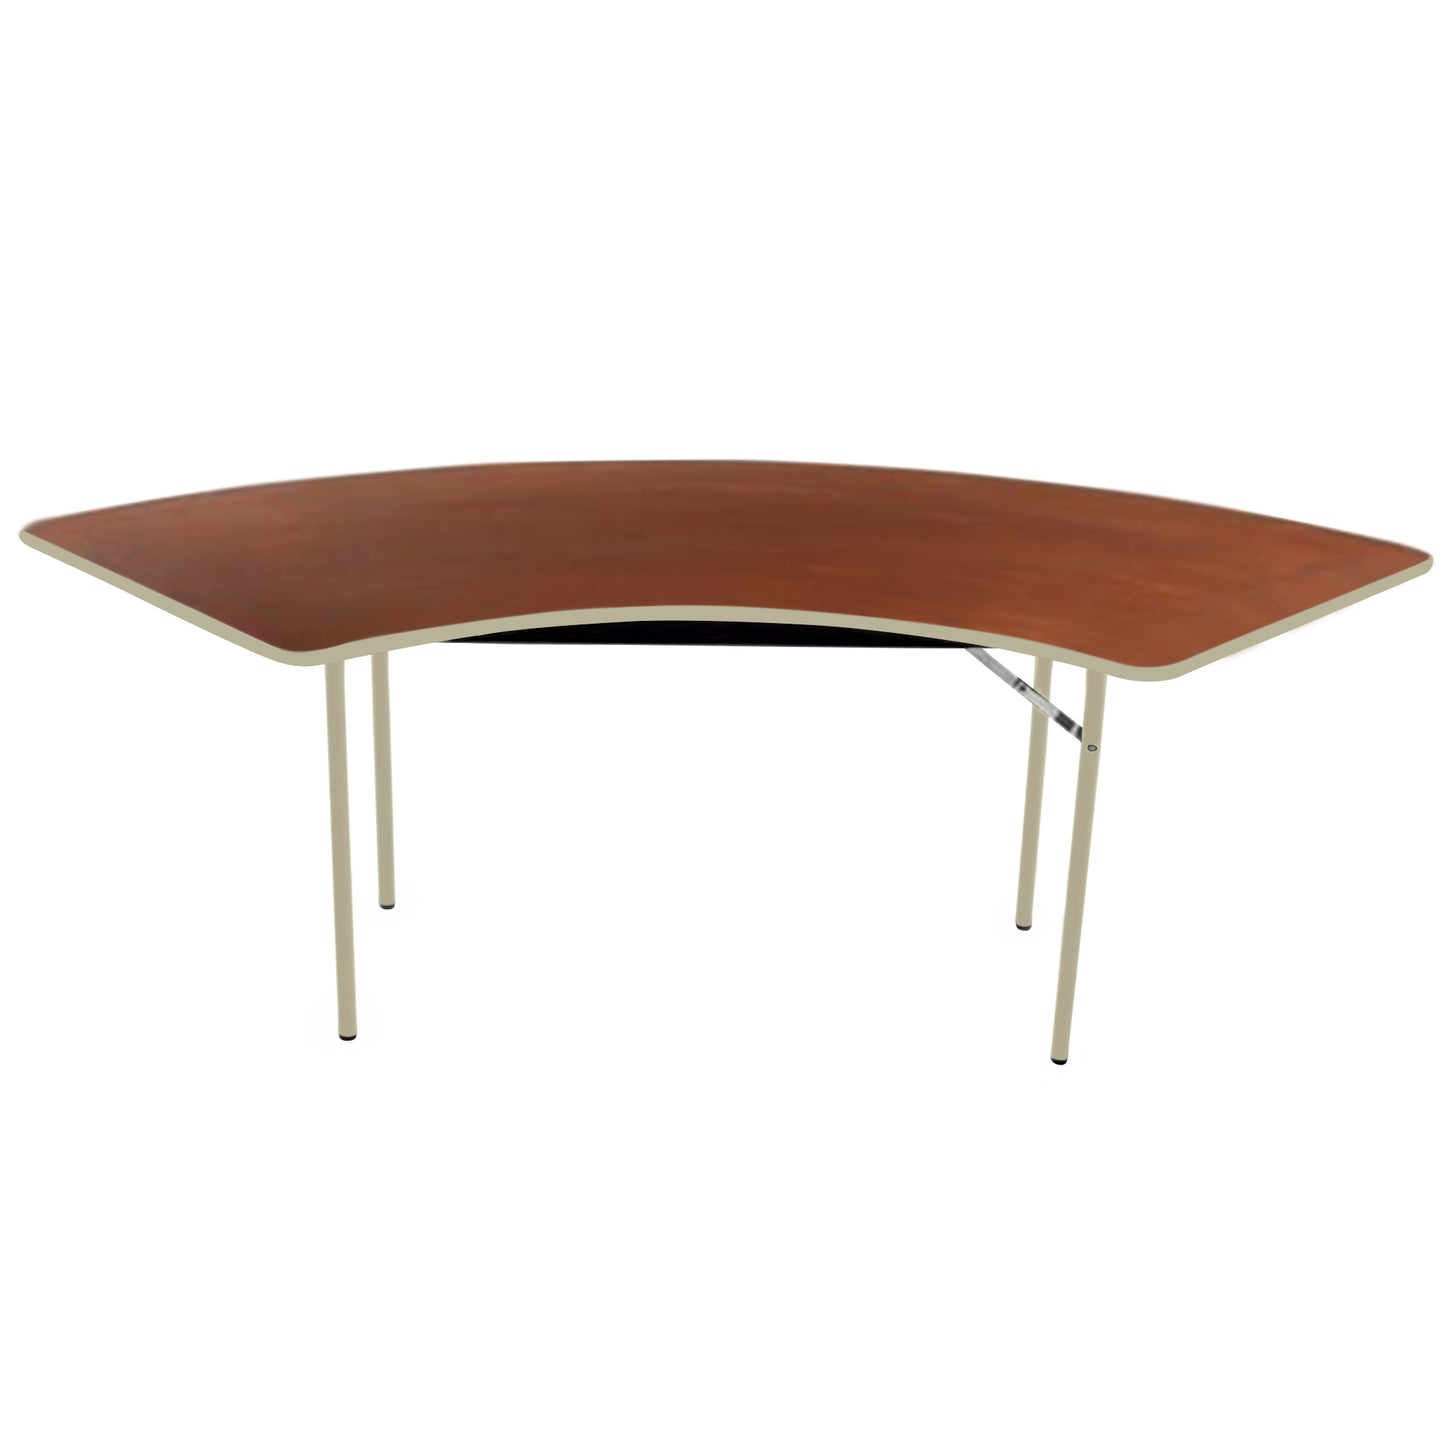 AmTab Folding Table - Plywood Stained and Sealed - Vinyl T-Molding Edge - Serpentine - 30"W x 30,60"L x 29"H  (AmTab AMT-SE305PM)